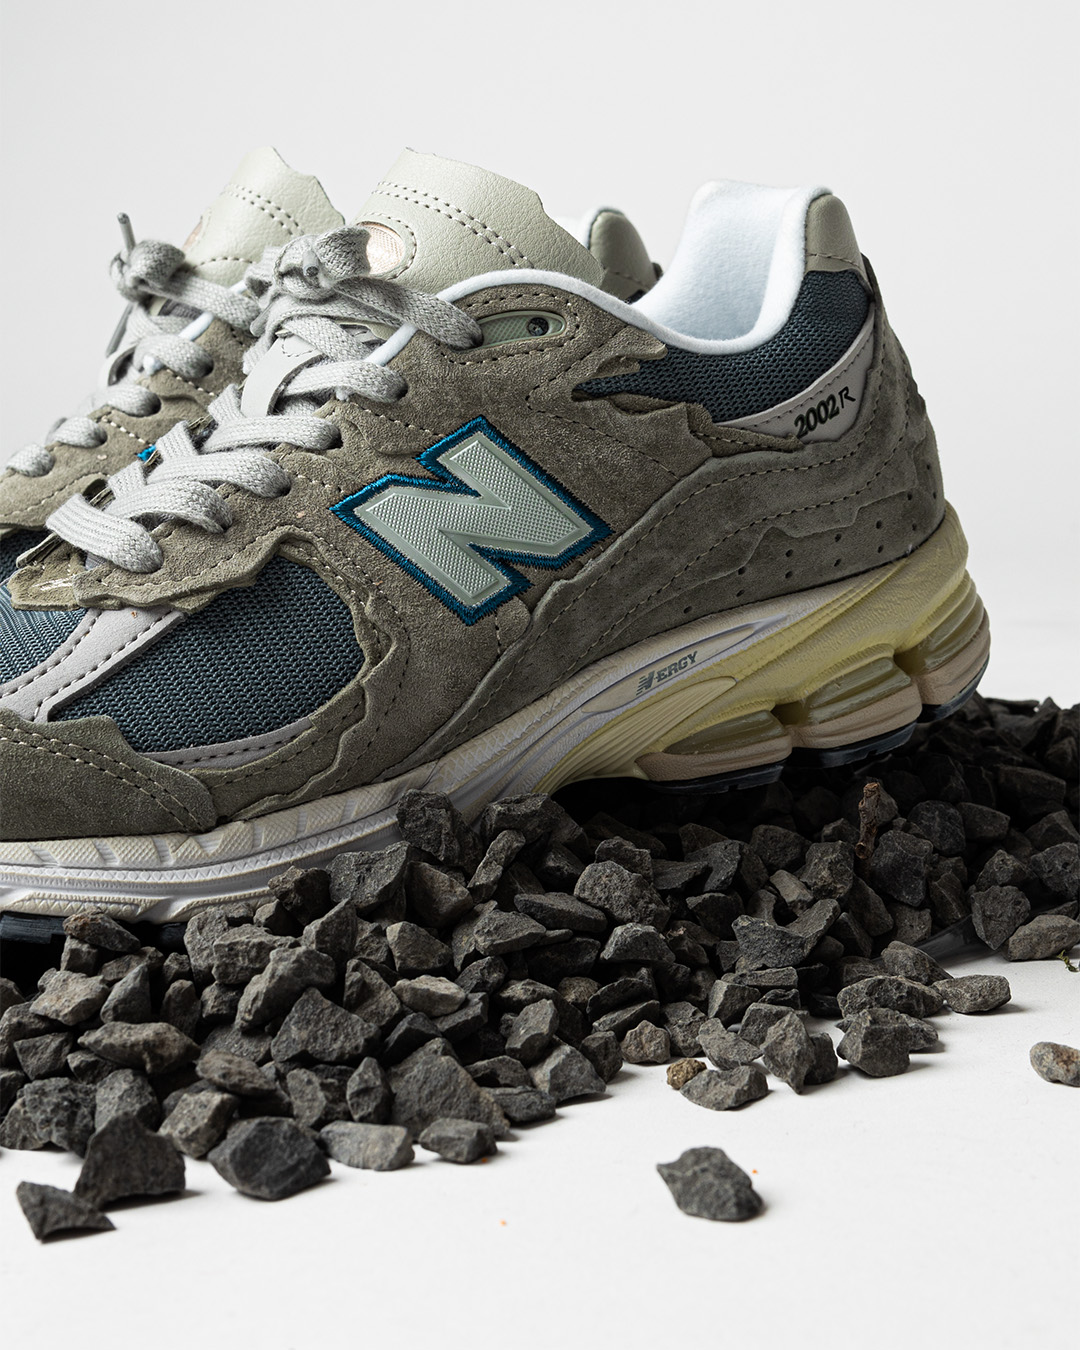 New Balance Protection Pack M2002RDD Mirage Grey on stones